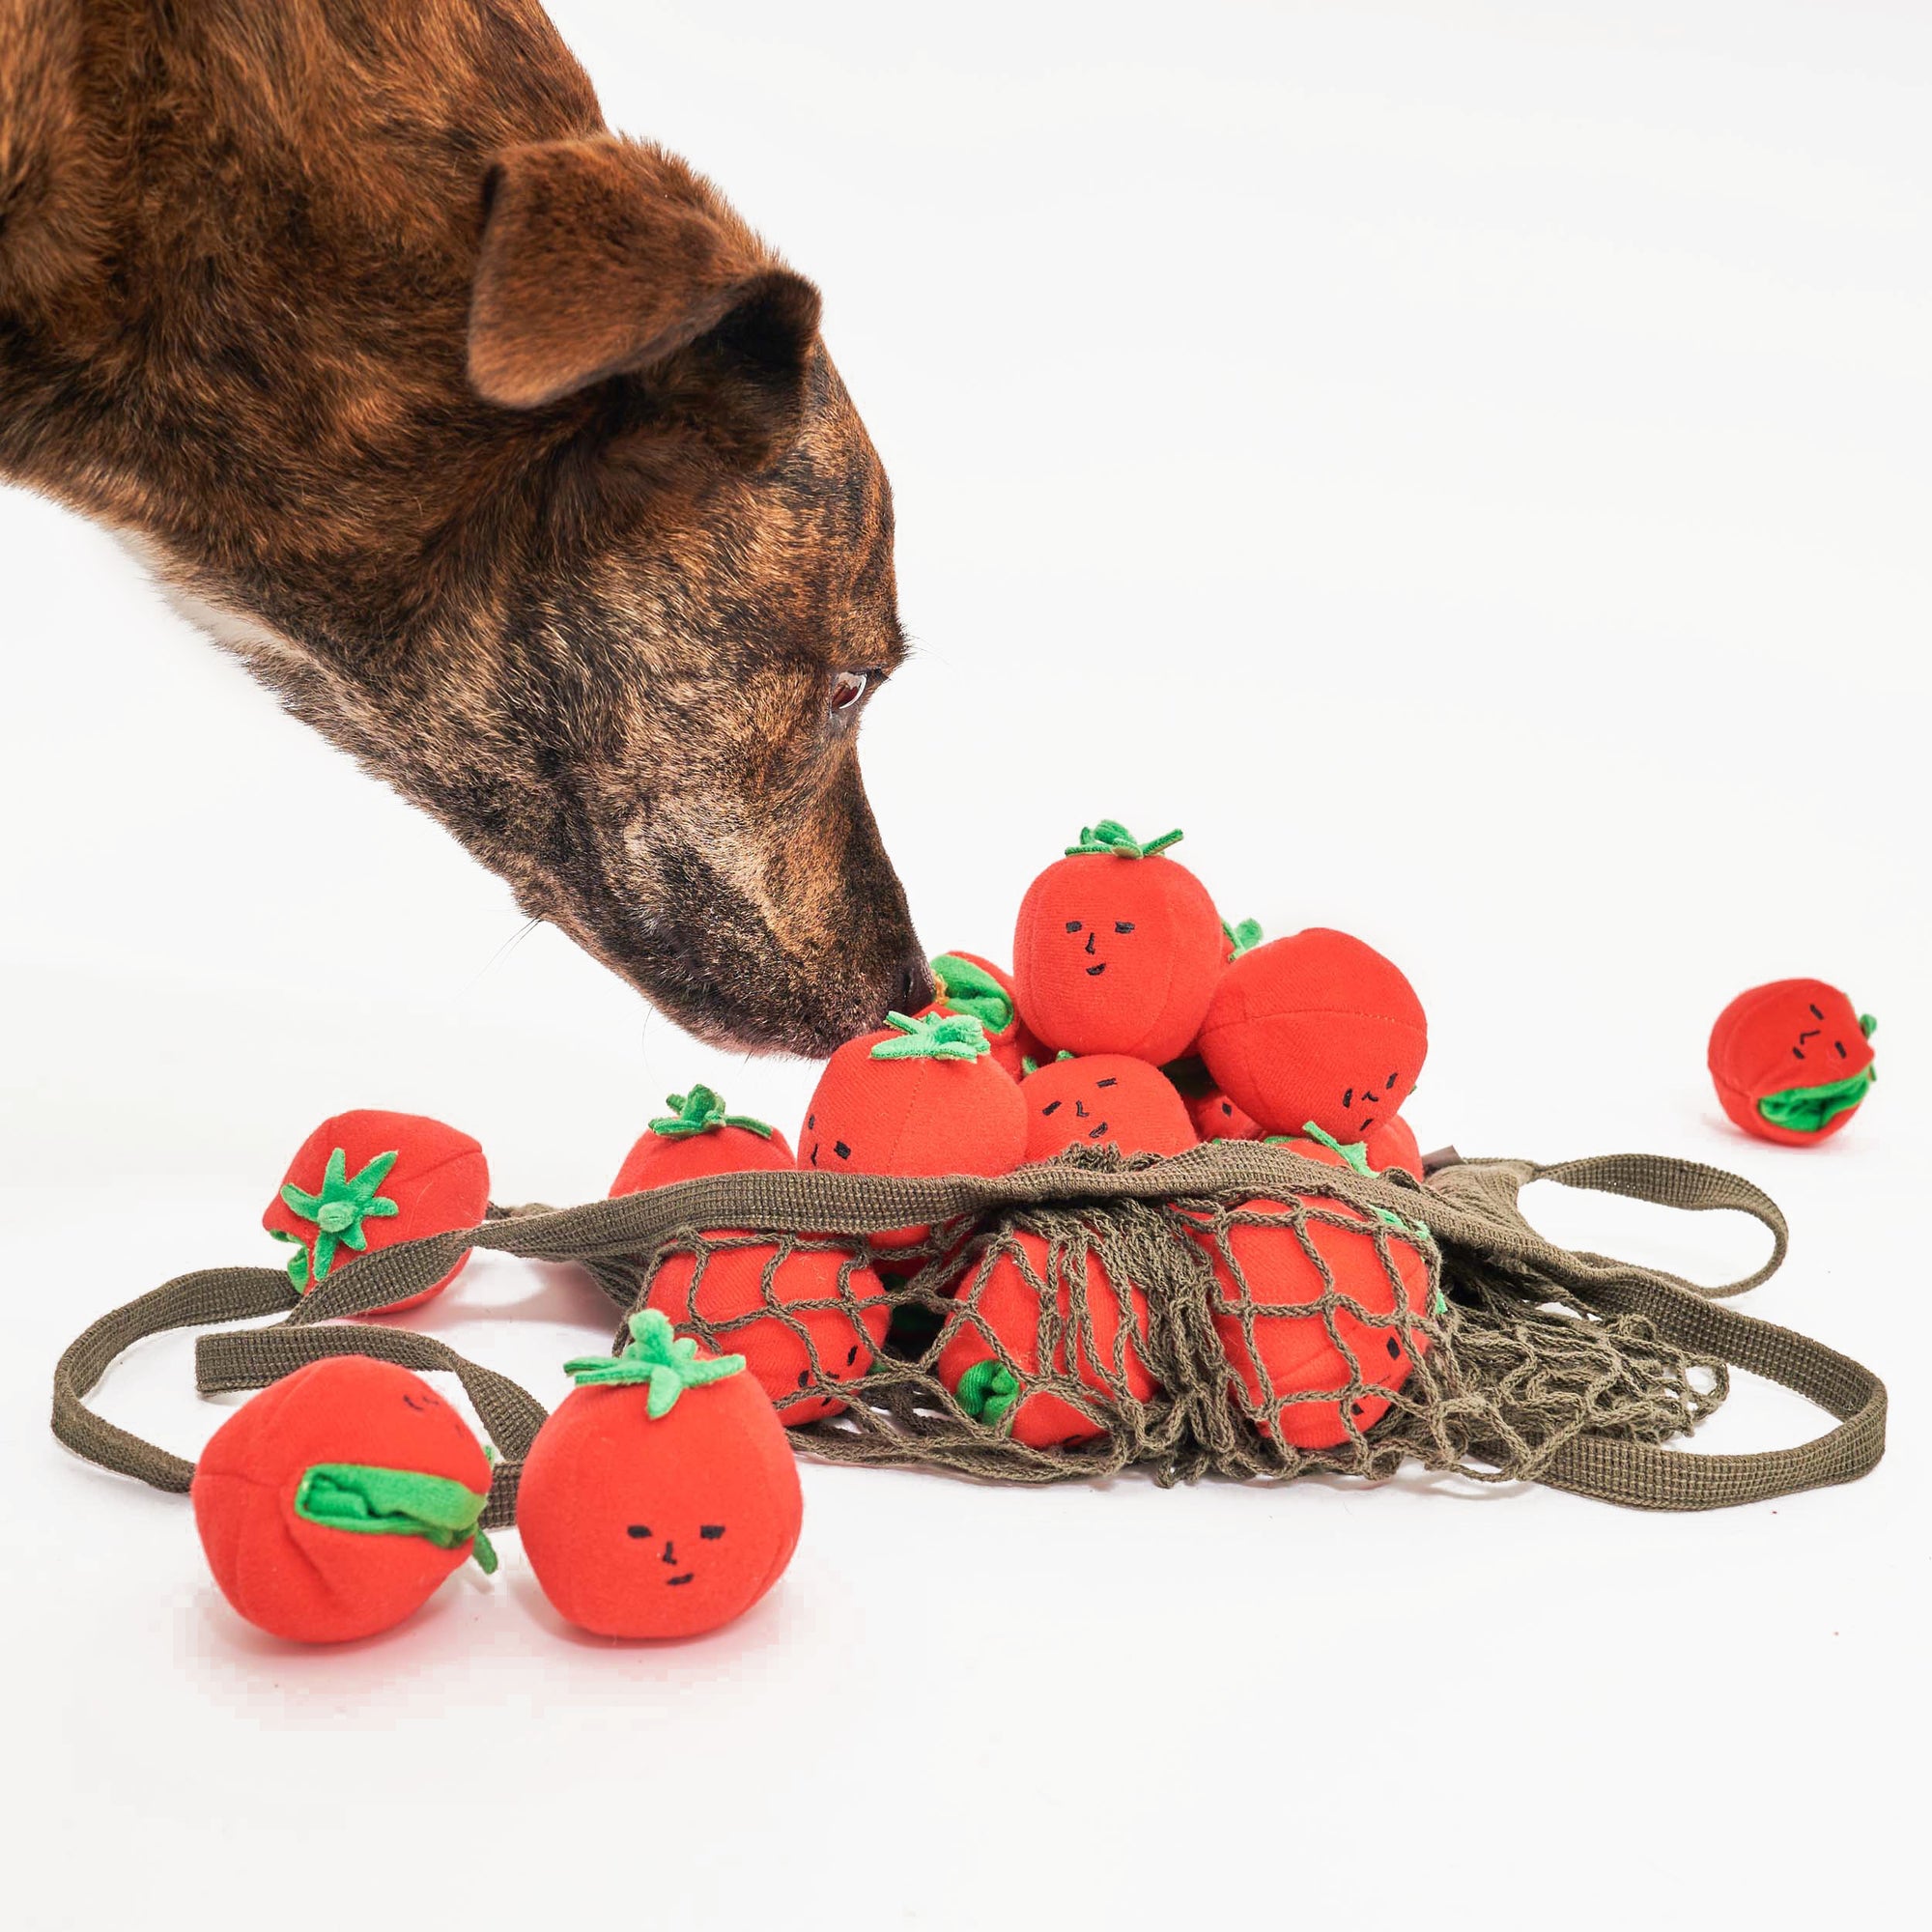 The image shows the brindle-coated dog inspecting a net filled with the plush tomatoes. The dog's nose is close to the toys, which are spilling out of what appears to be a green mesh bag, suggesting a scenario where the dog may be selecting a toy or simply curious about the collection of toys. The image captures a natural exploratory behavior, common with dogs when they encounter new or interesting objects.